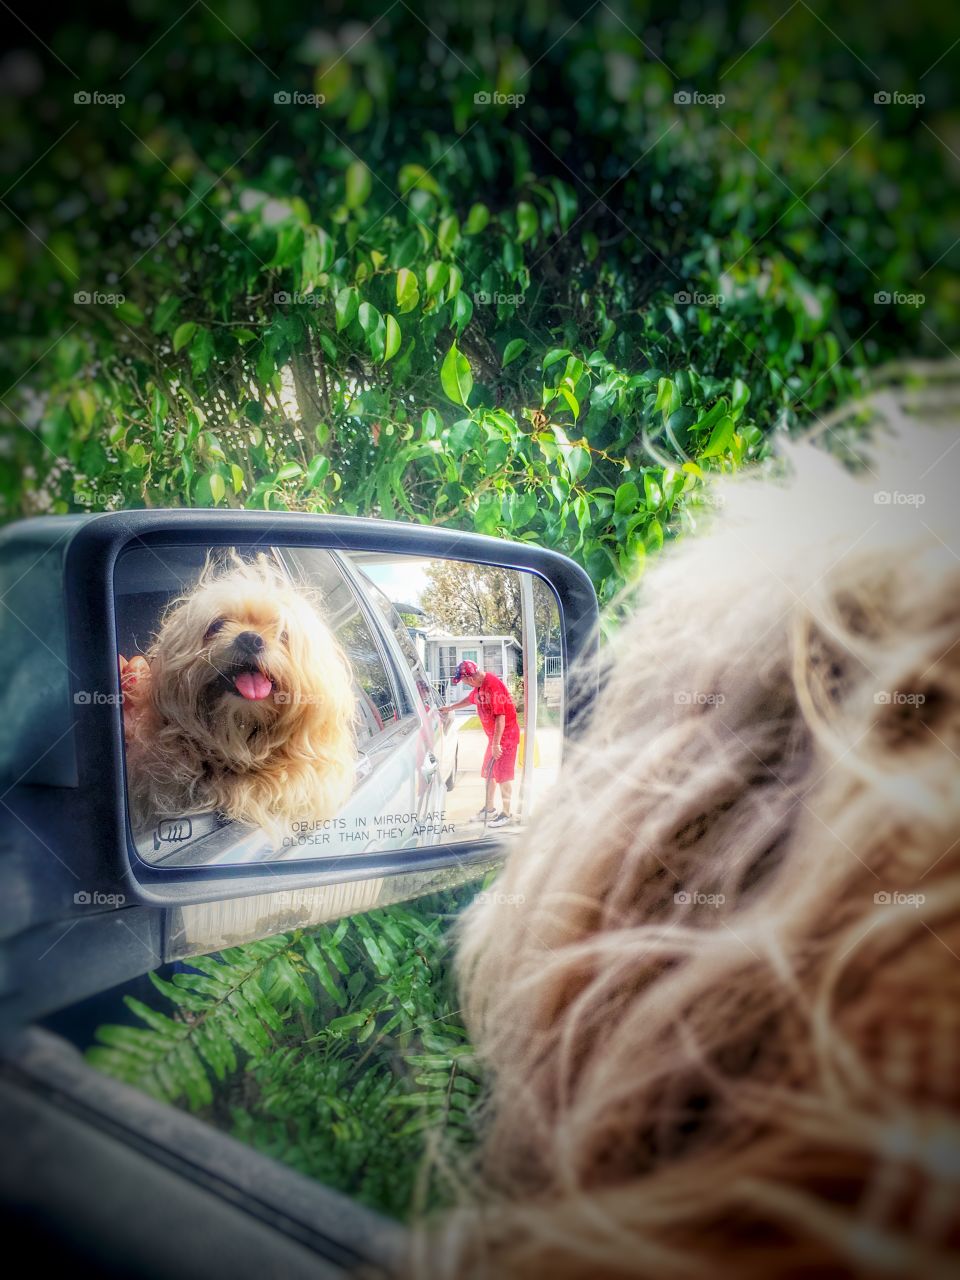 Fluffy dog reflecting on the car's mirror